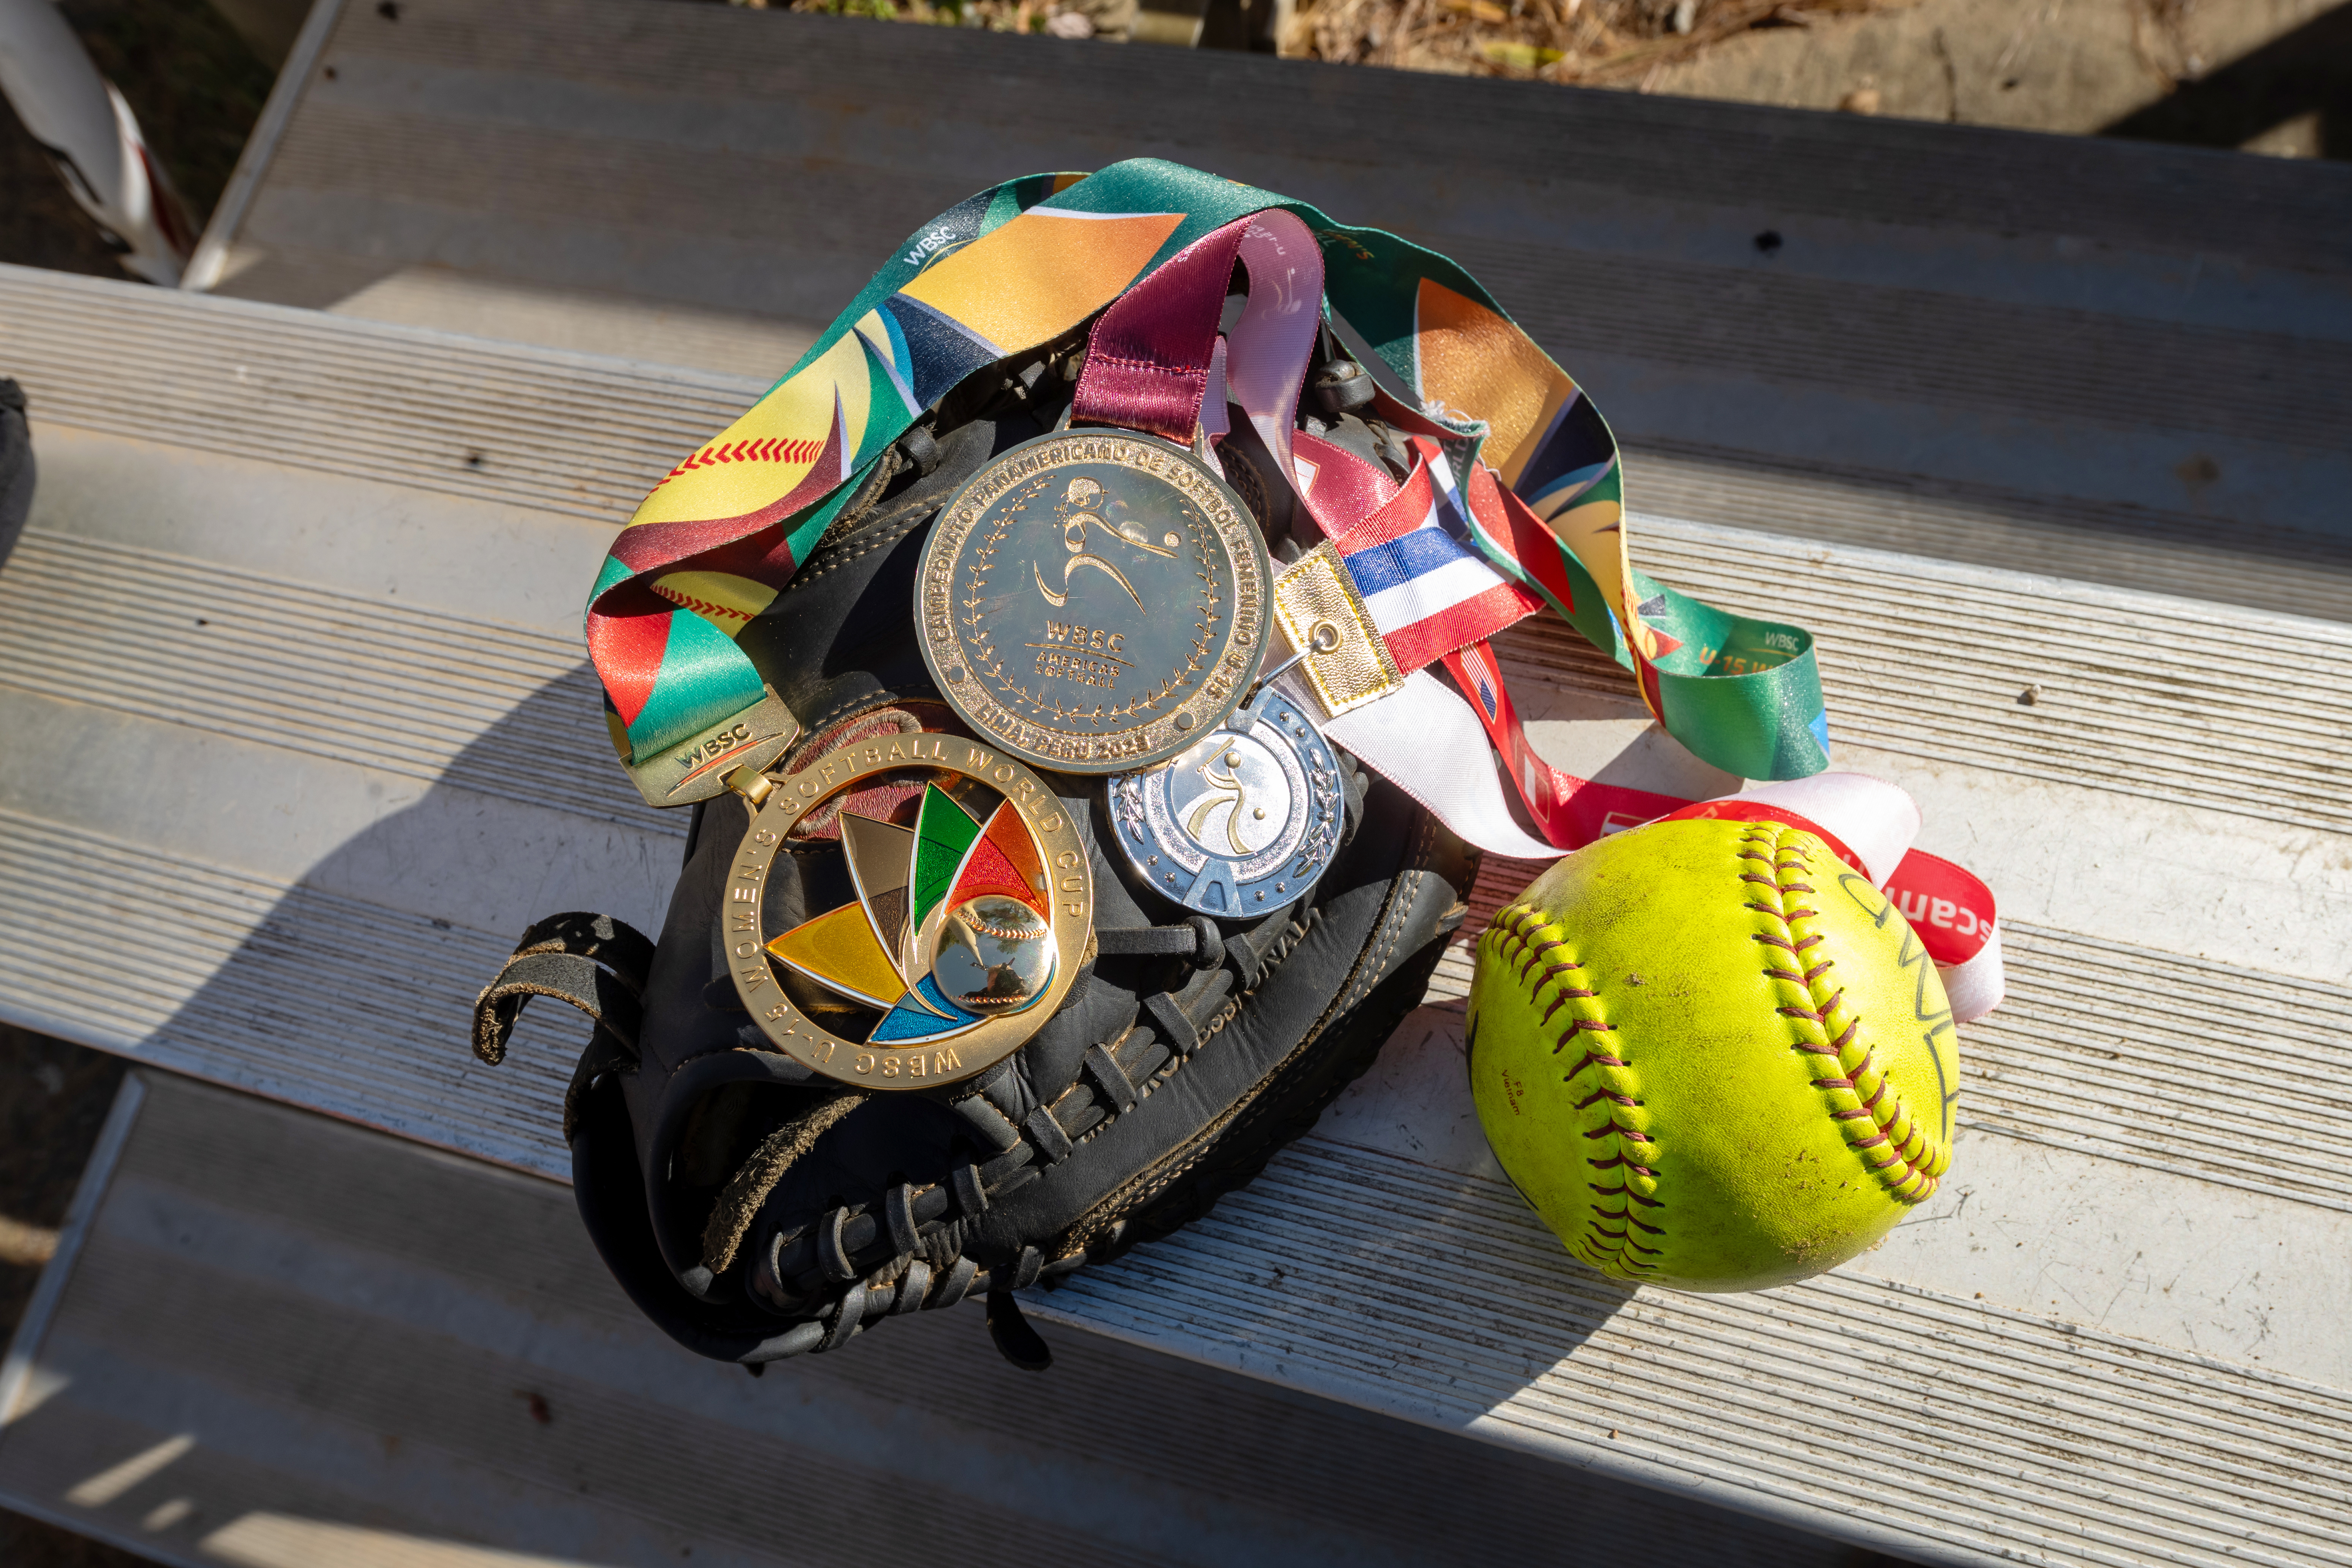 A closer look at Riley Staats' medals, softball, and glove.